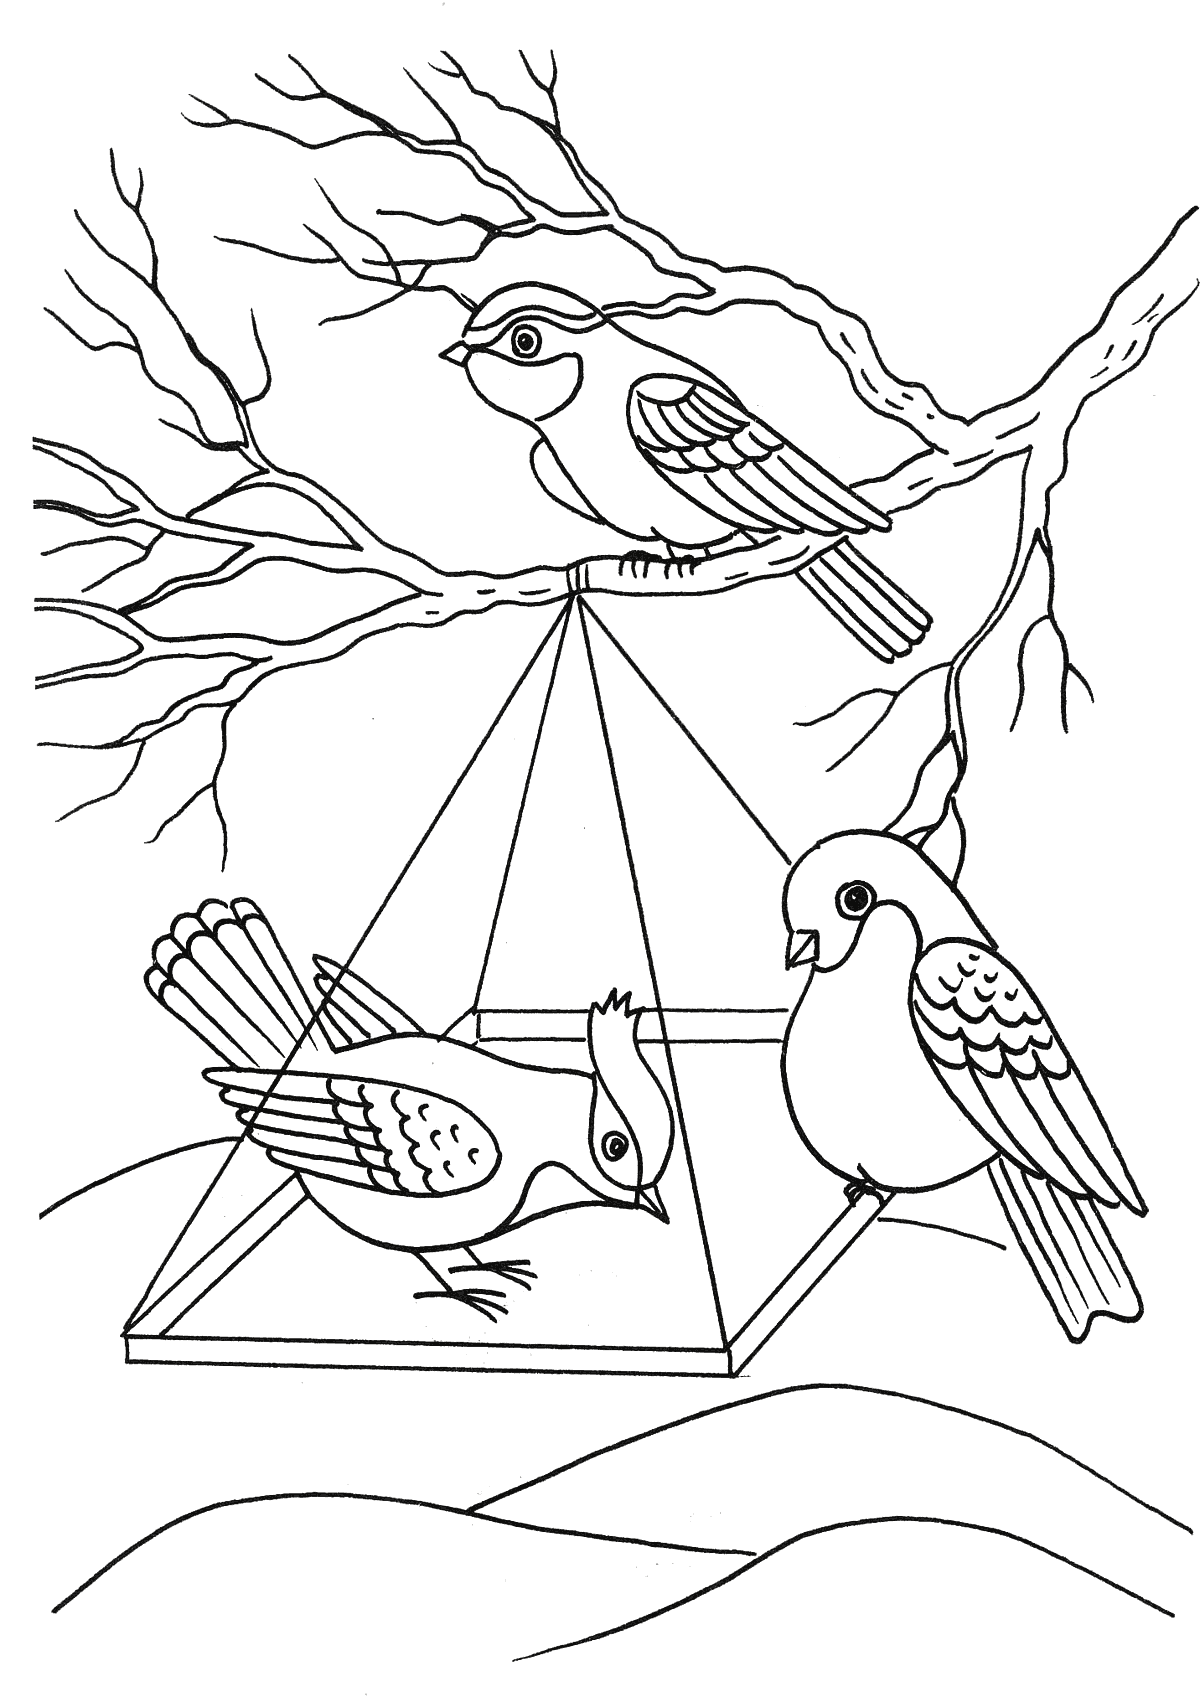 Coloring page - Birds in a feeder